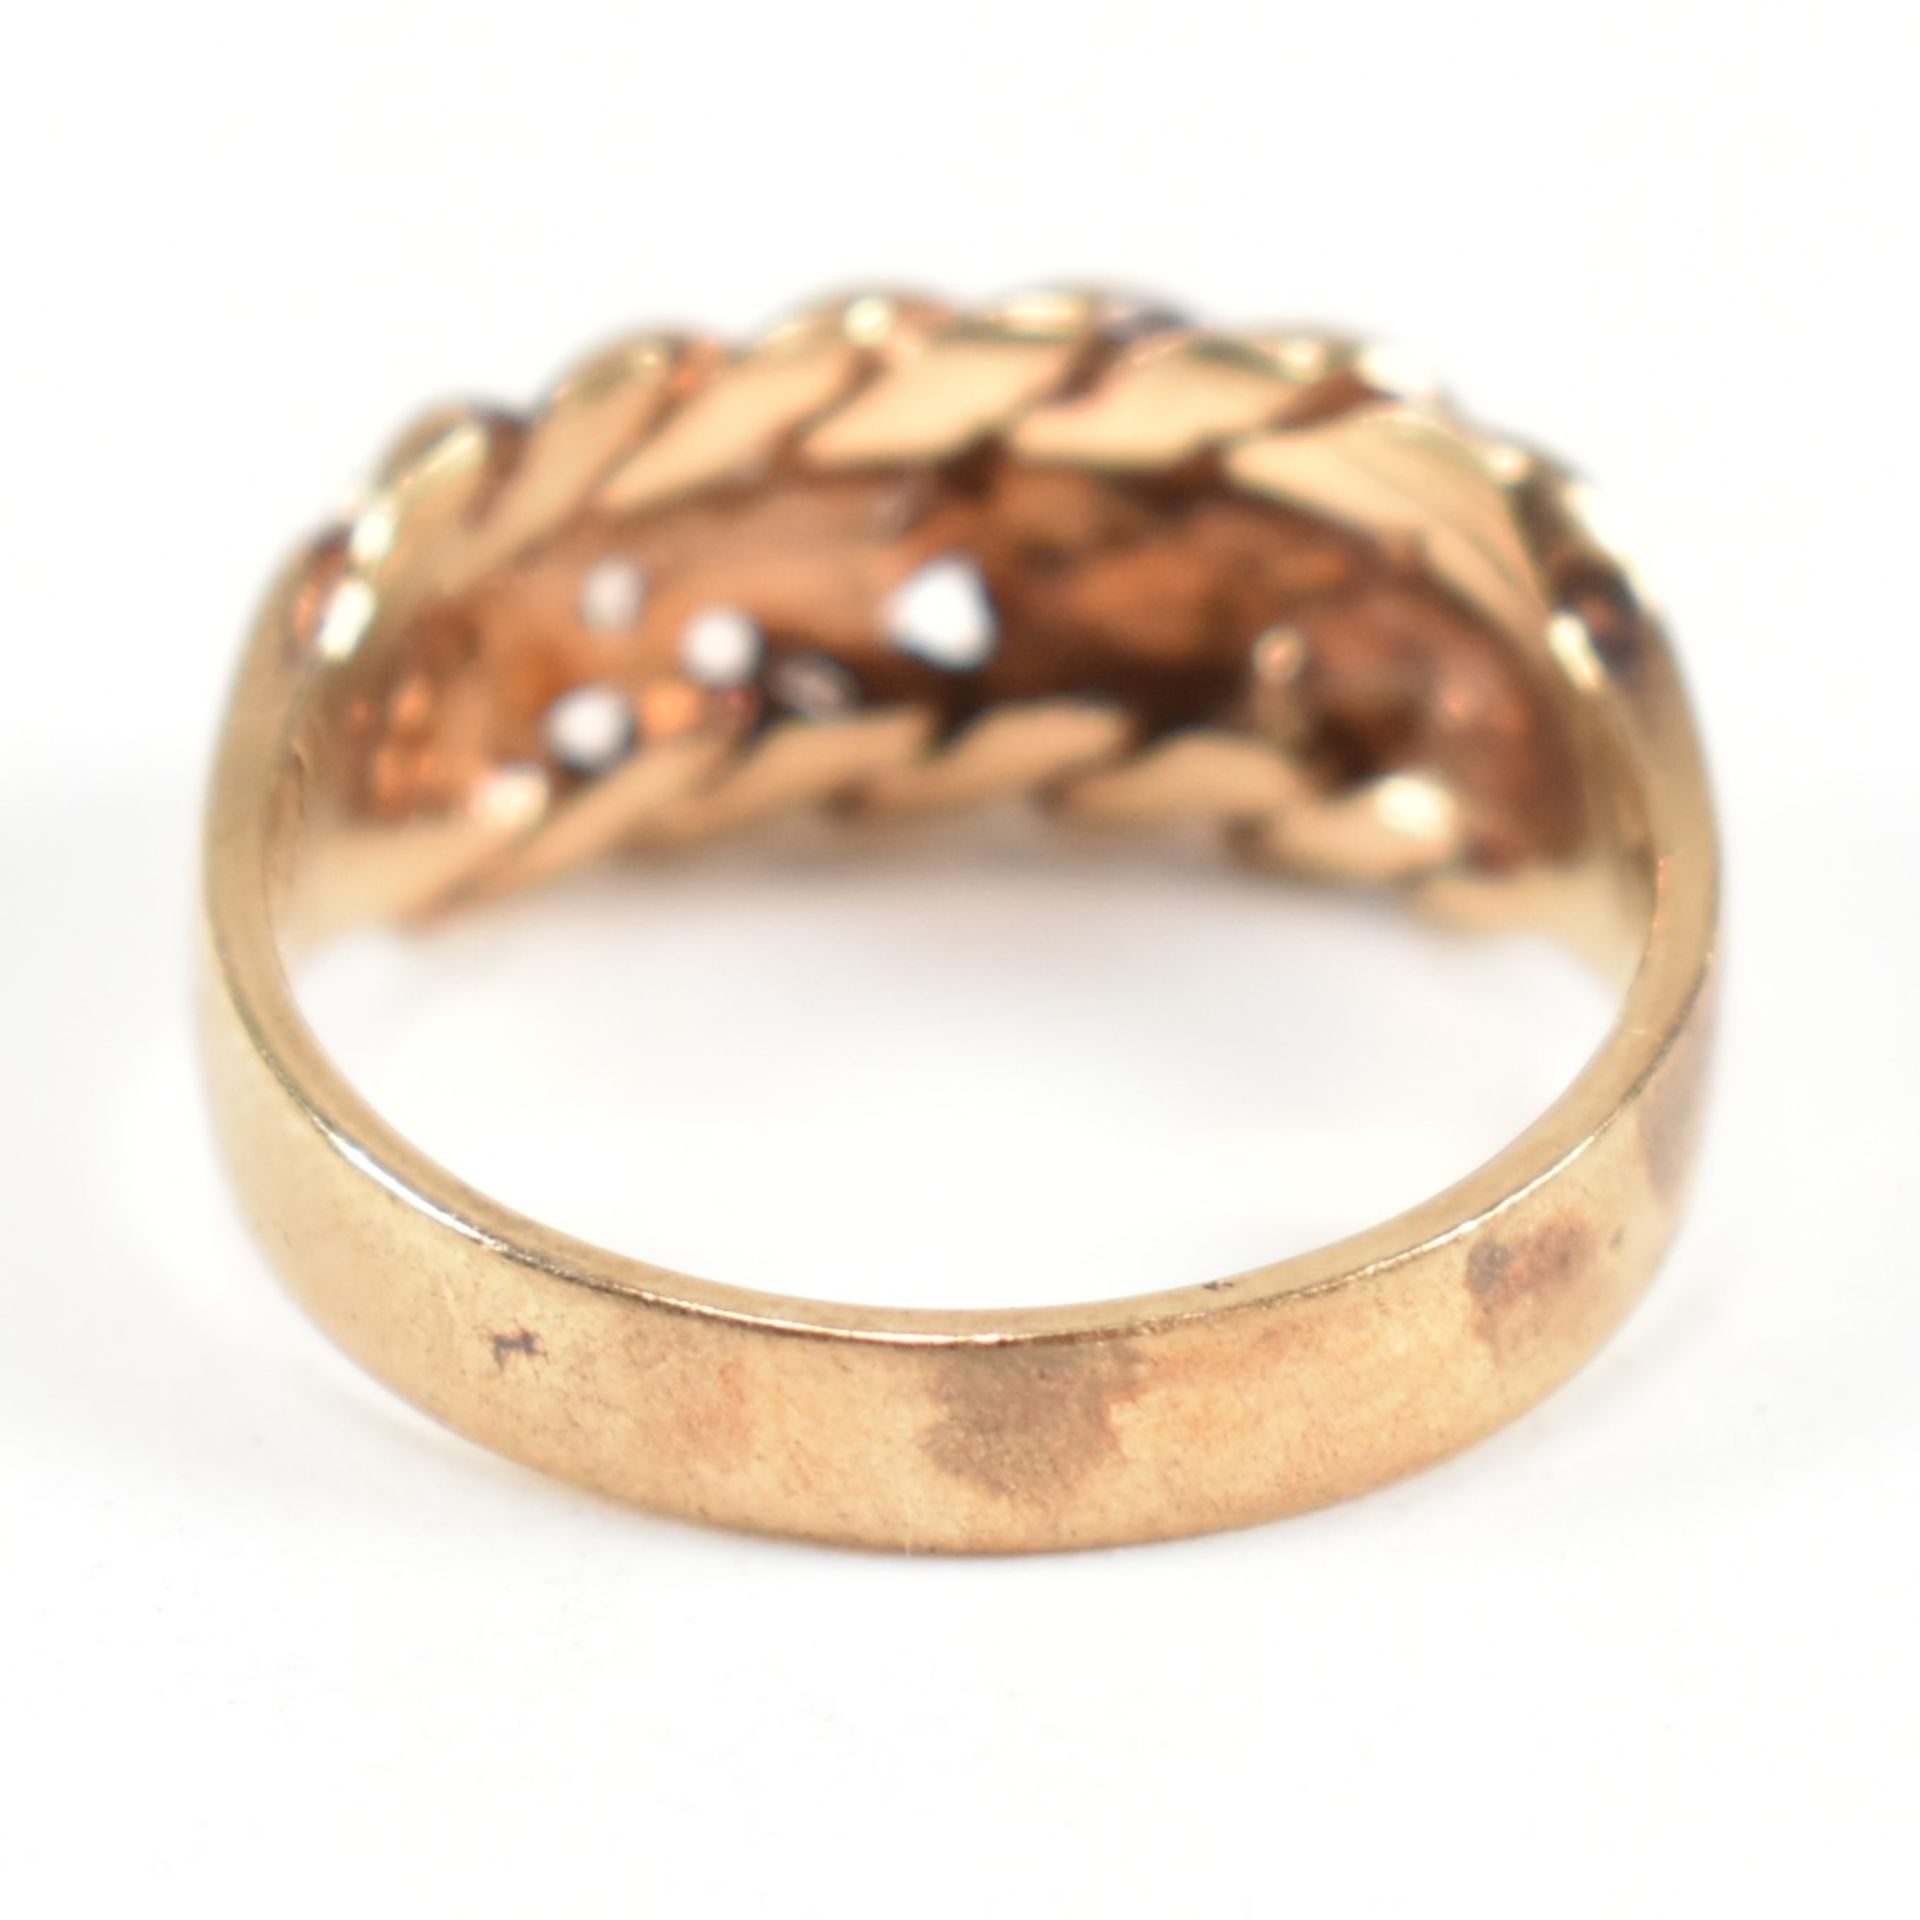 HALLMARKED 9CT GOLD KEEPER RING - Image 2 of 10